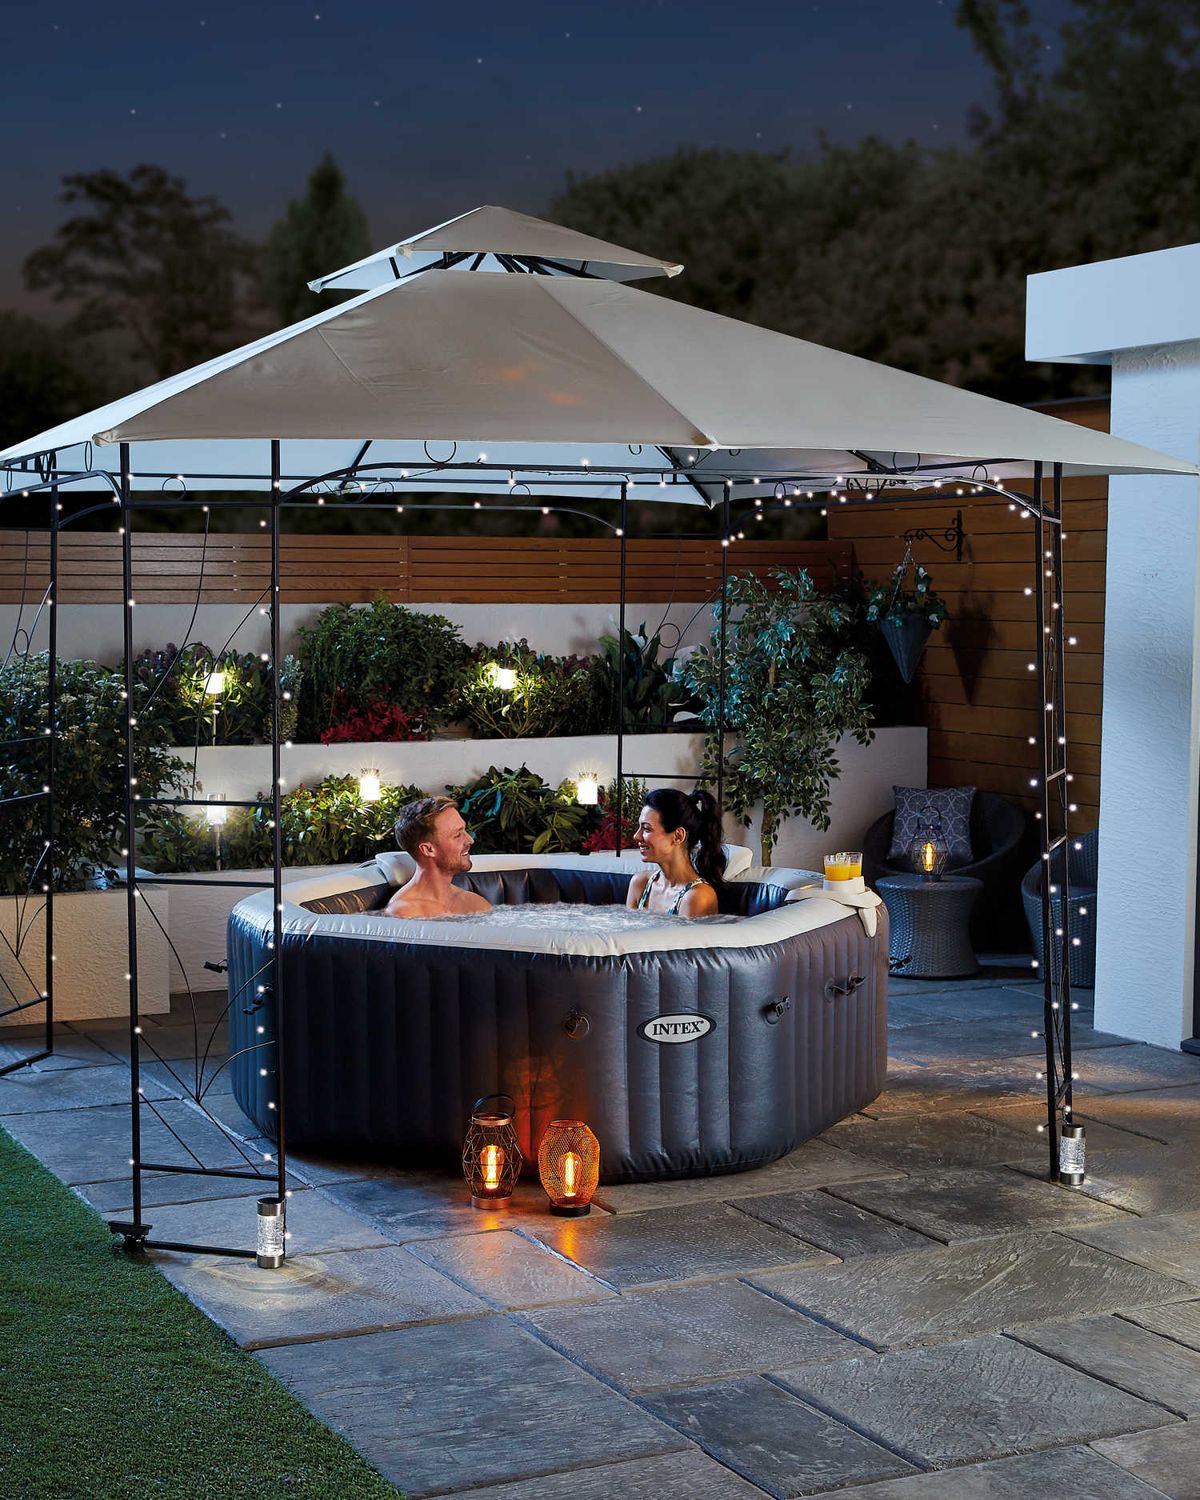 Seen the Aldi gazebo yet? Find it here and other great gazebo deals